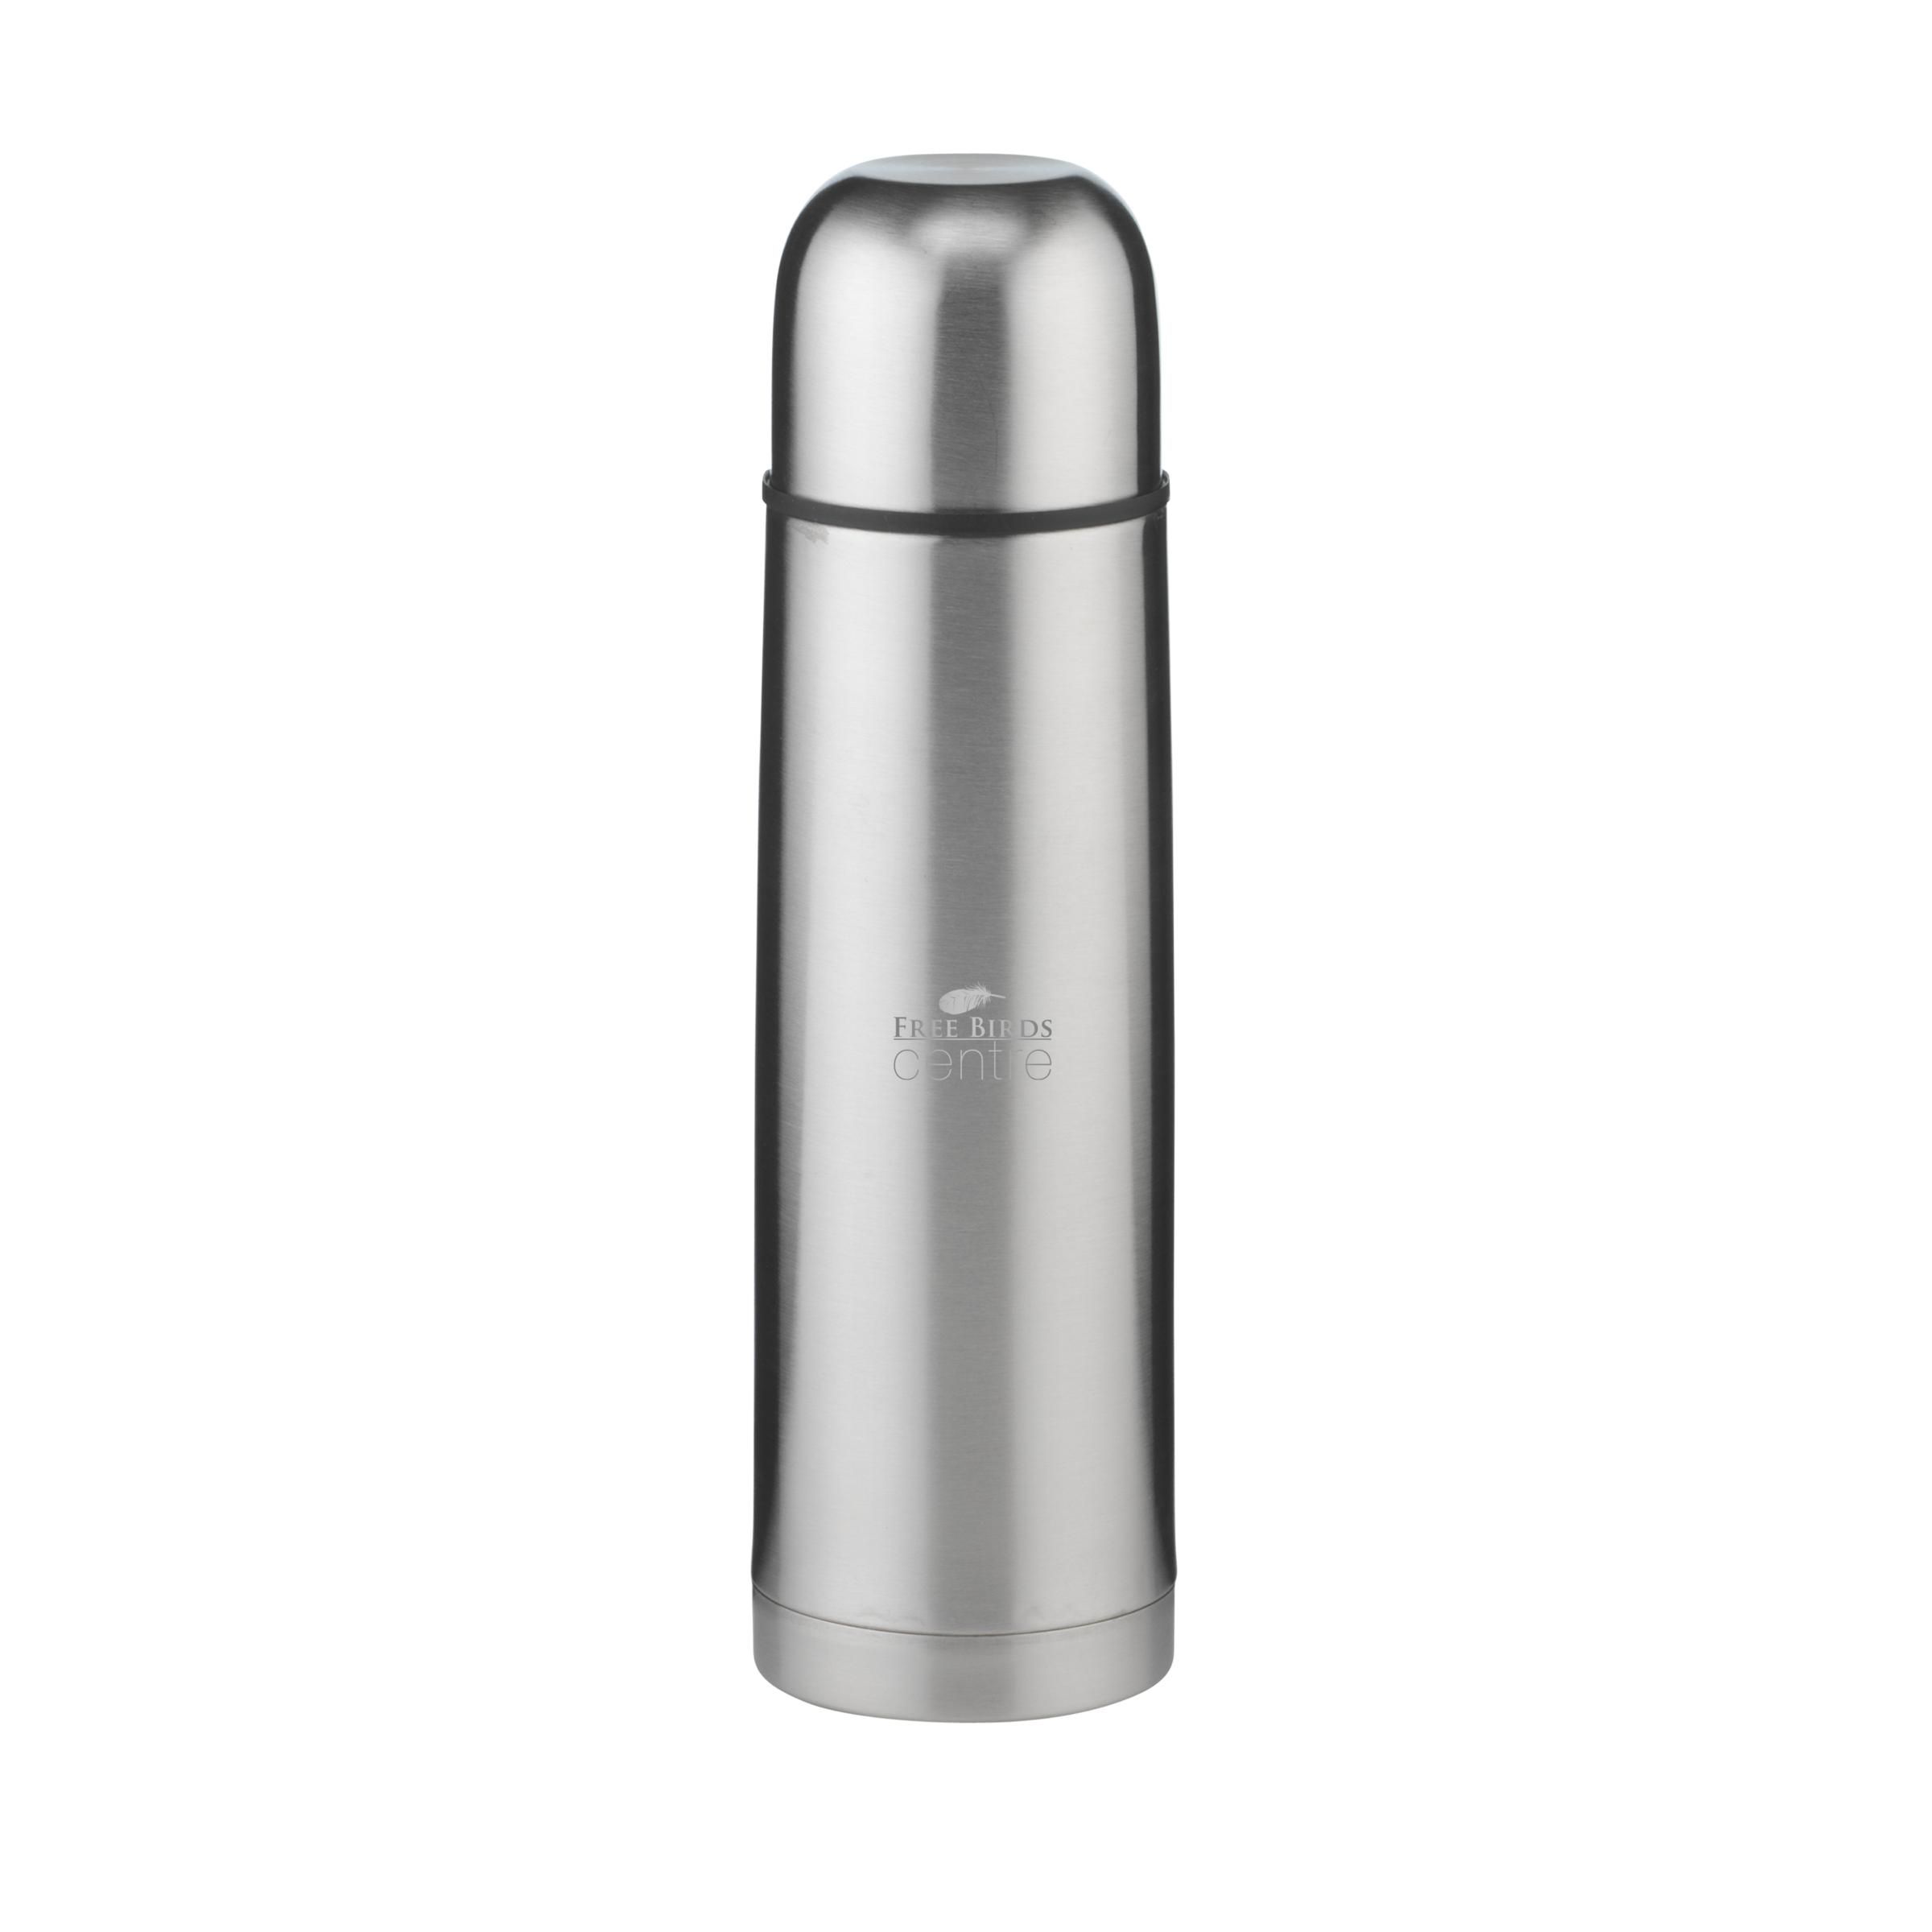 THERMOS Publicitaire Thermotop Maxi